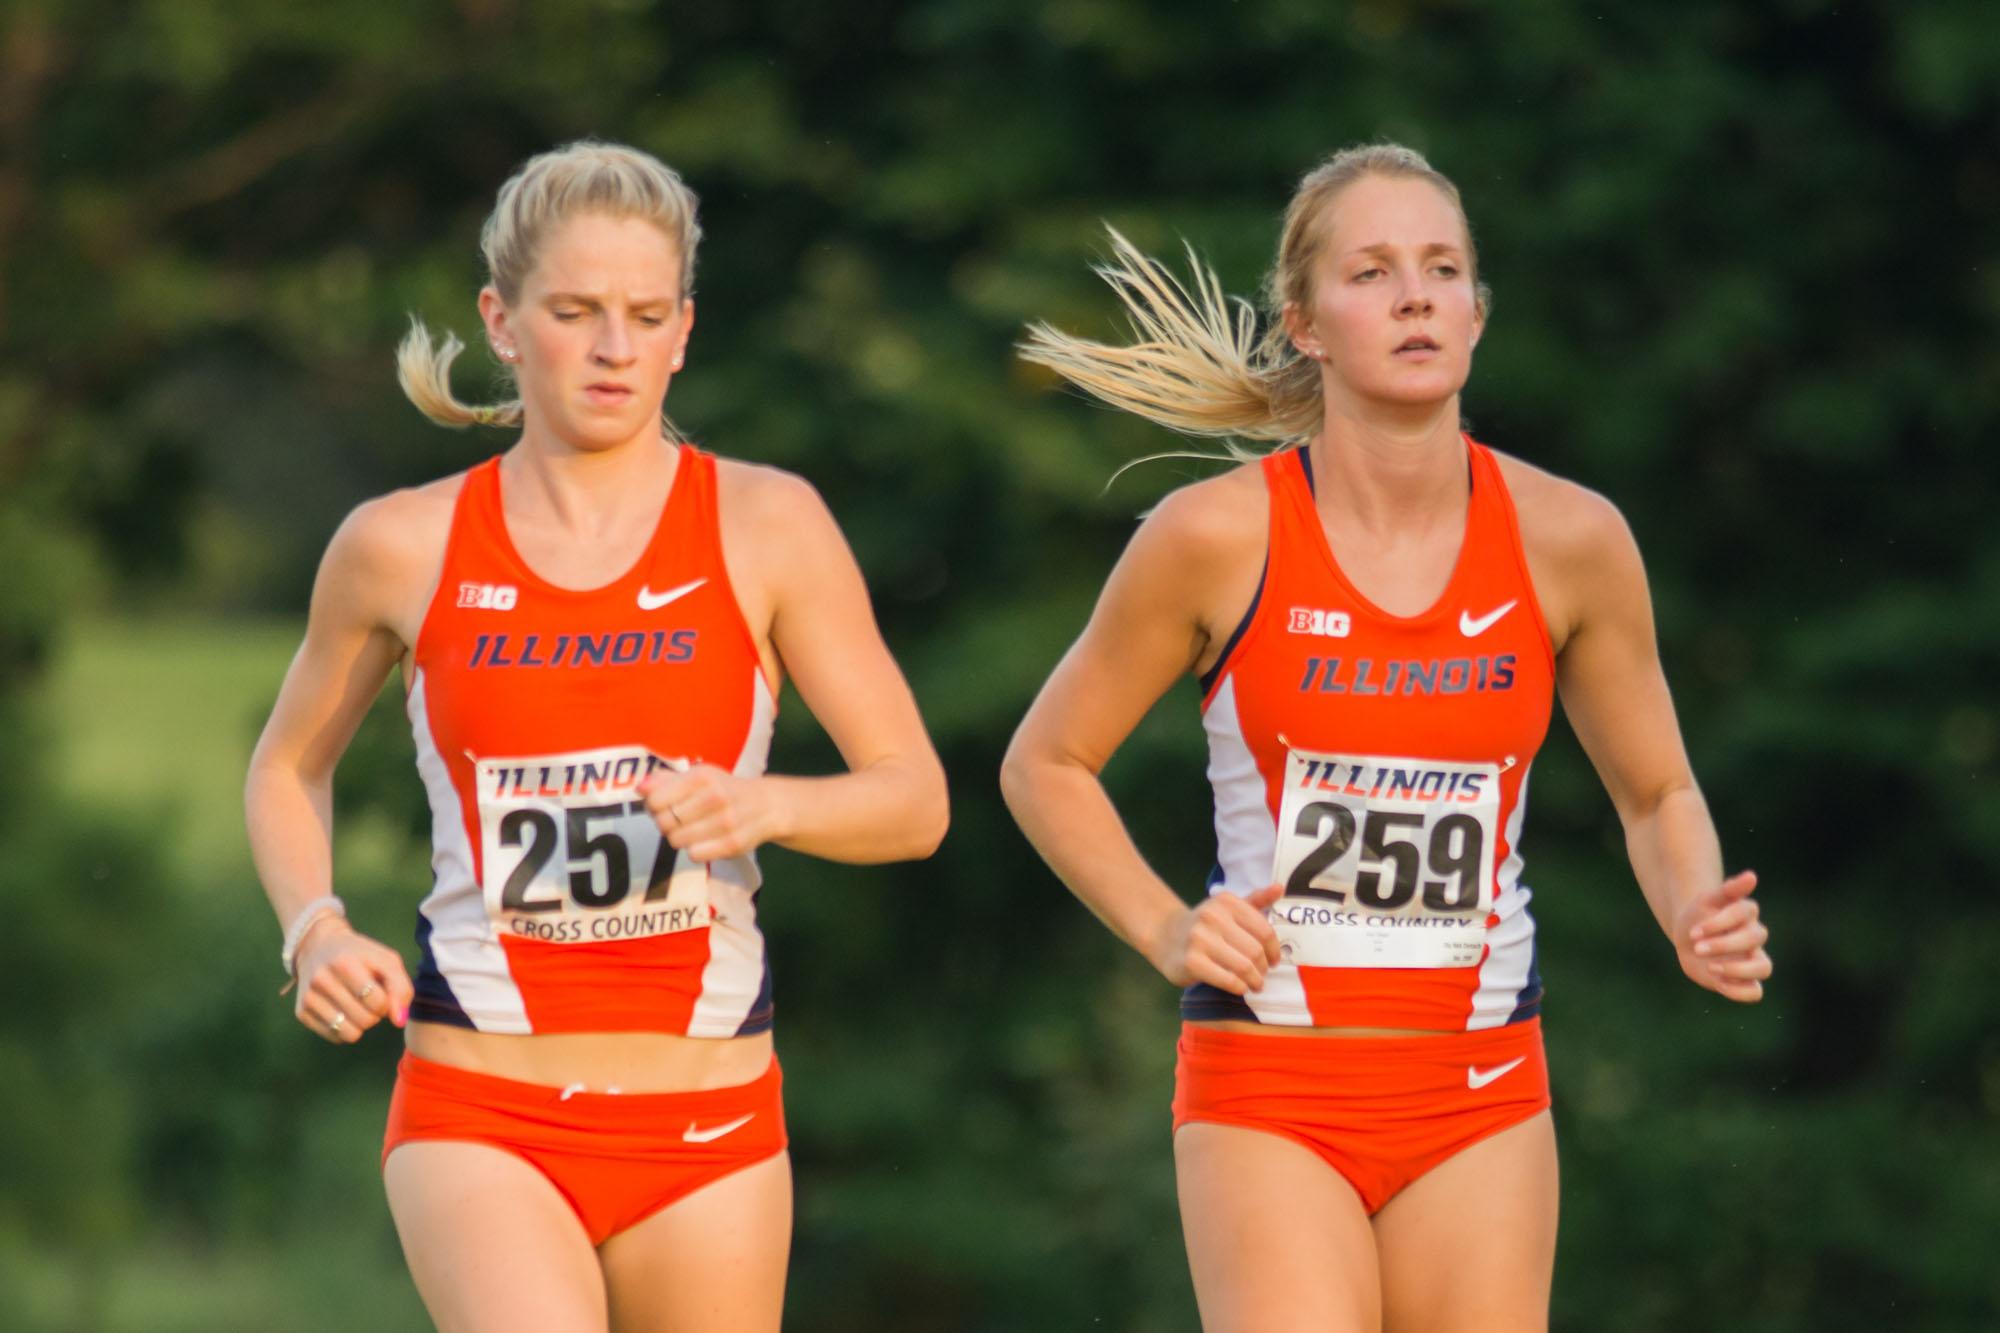 Illinois women's crosscountry team heads to Evanston to compete in Big